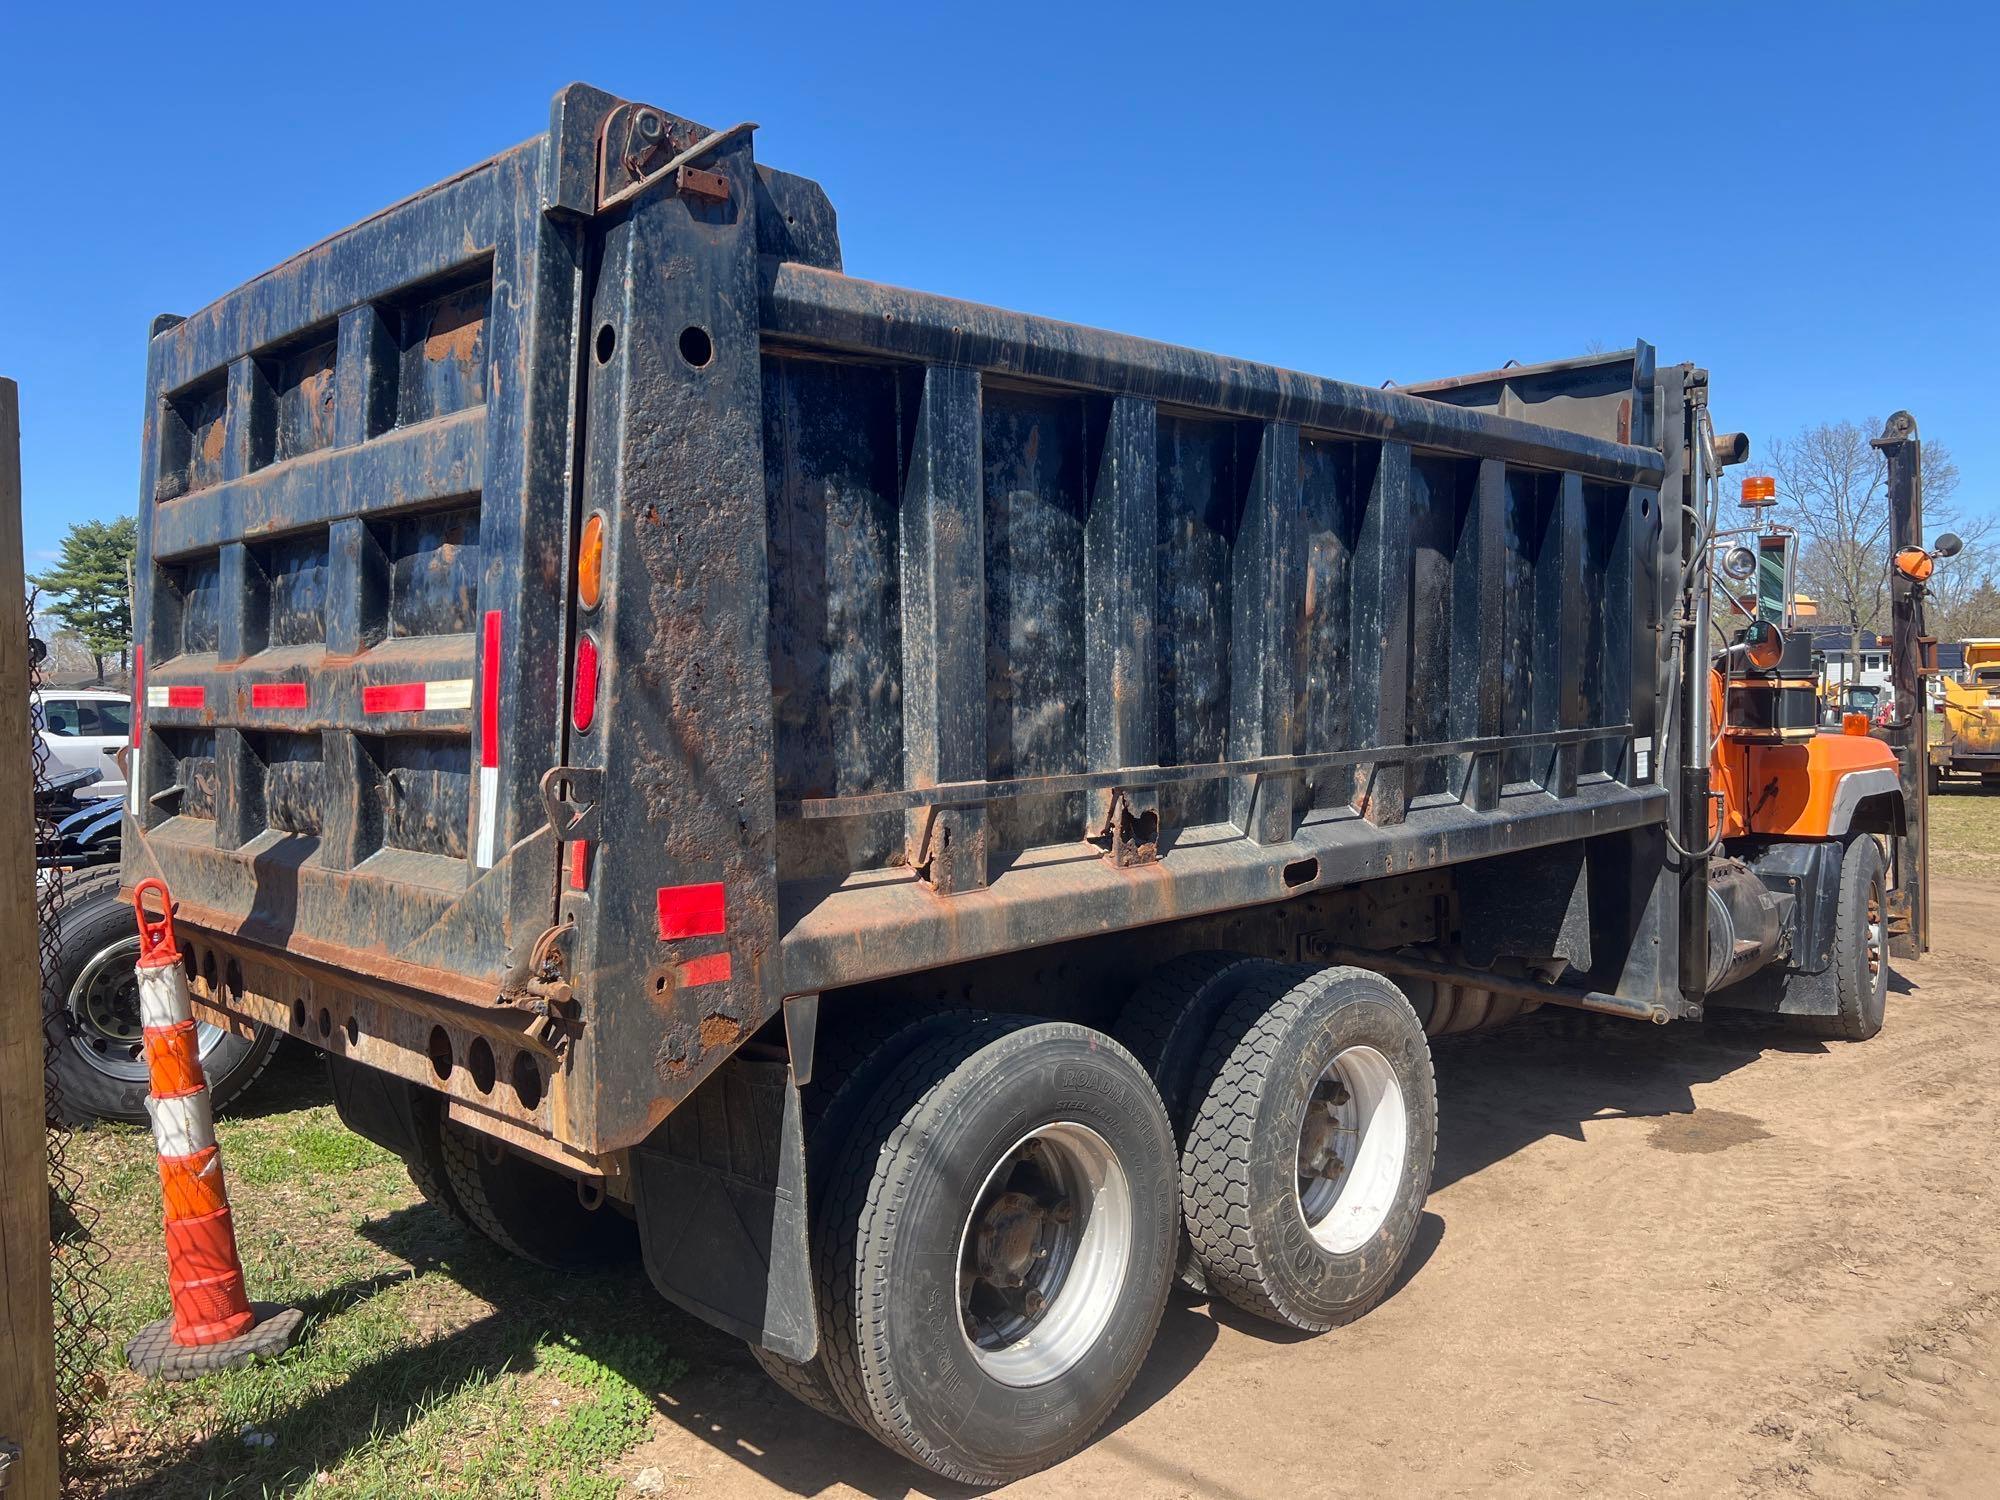 1996 MACK RD DUMP TRUCK VN:026641powered by Mack diesel engine, 350hp, equipped with 12 speed